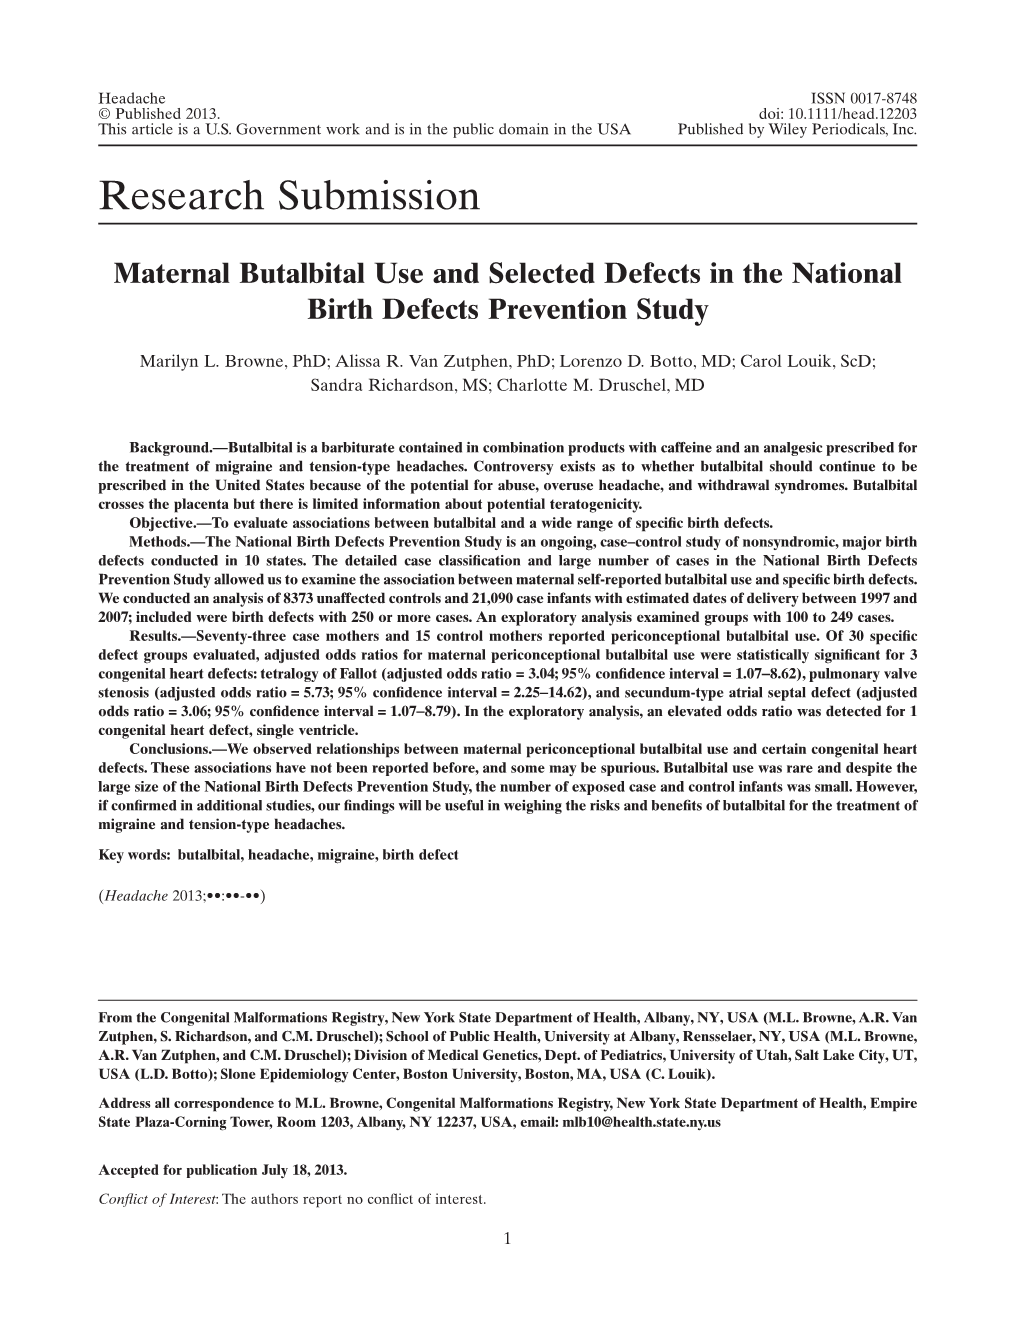 Maternal Butalbital Use and Selected Defects in the National Birth Defects Prevention Study